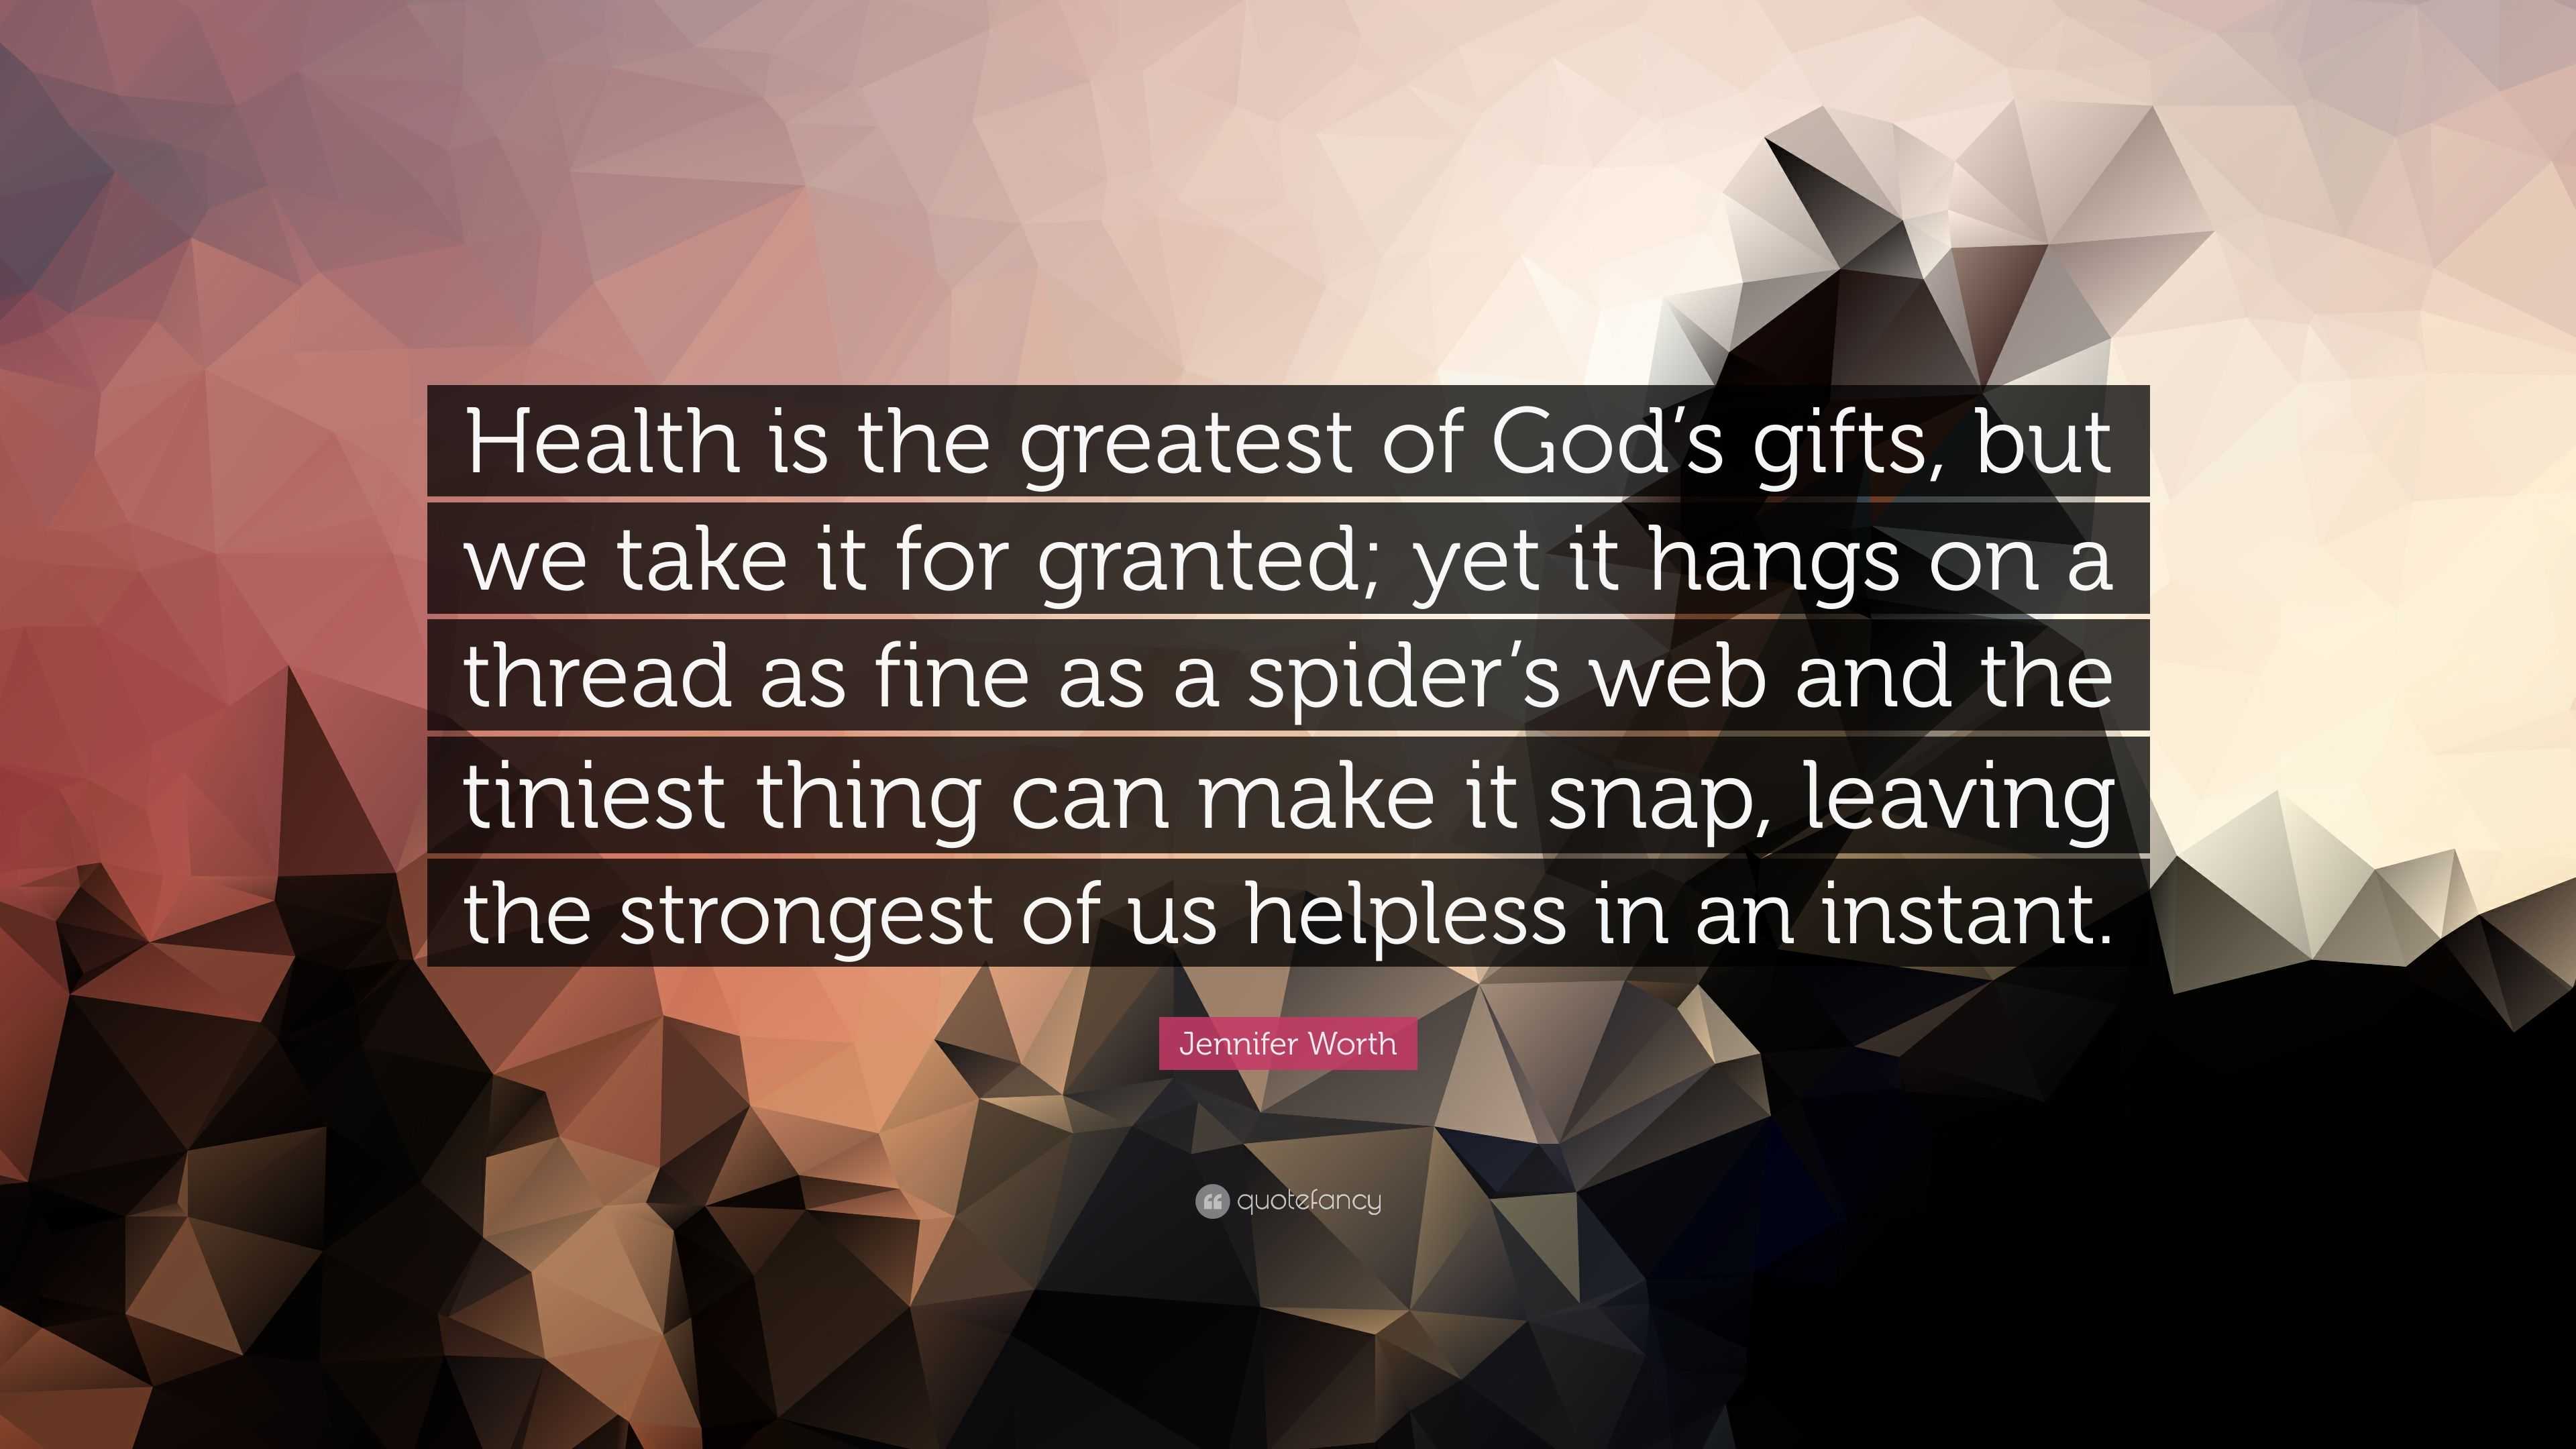 Health is the greatest gift - IdleHearts